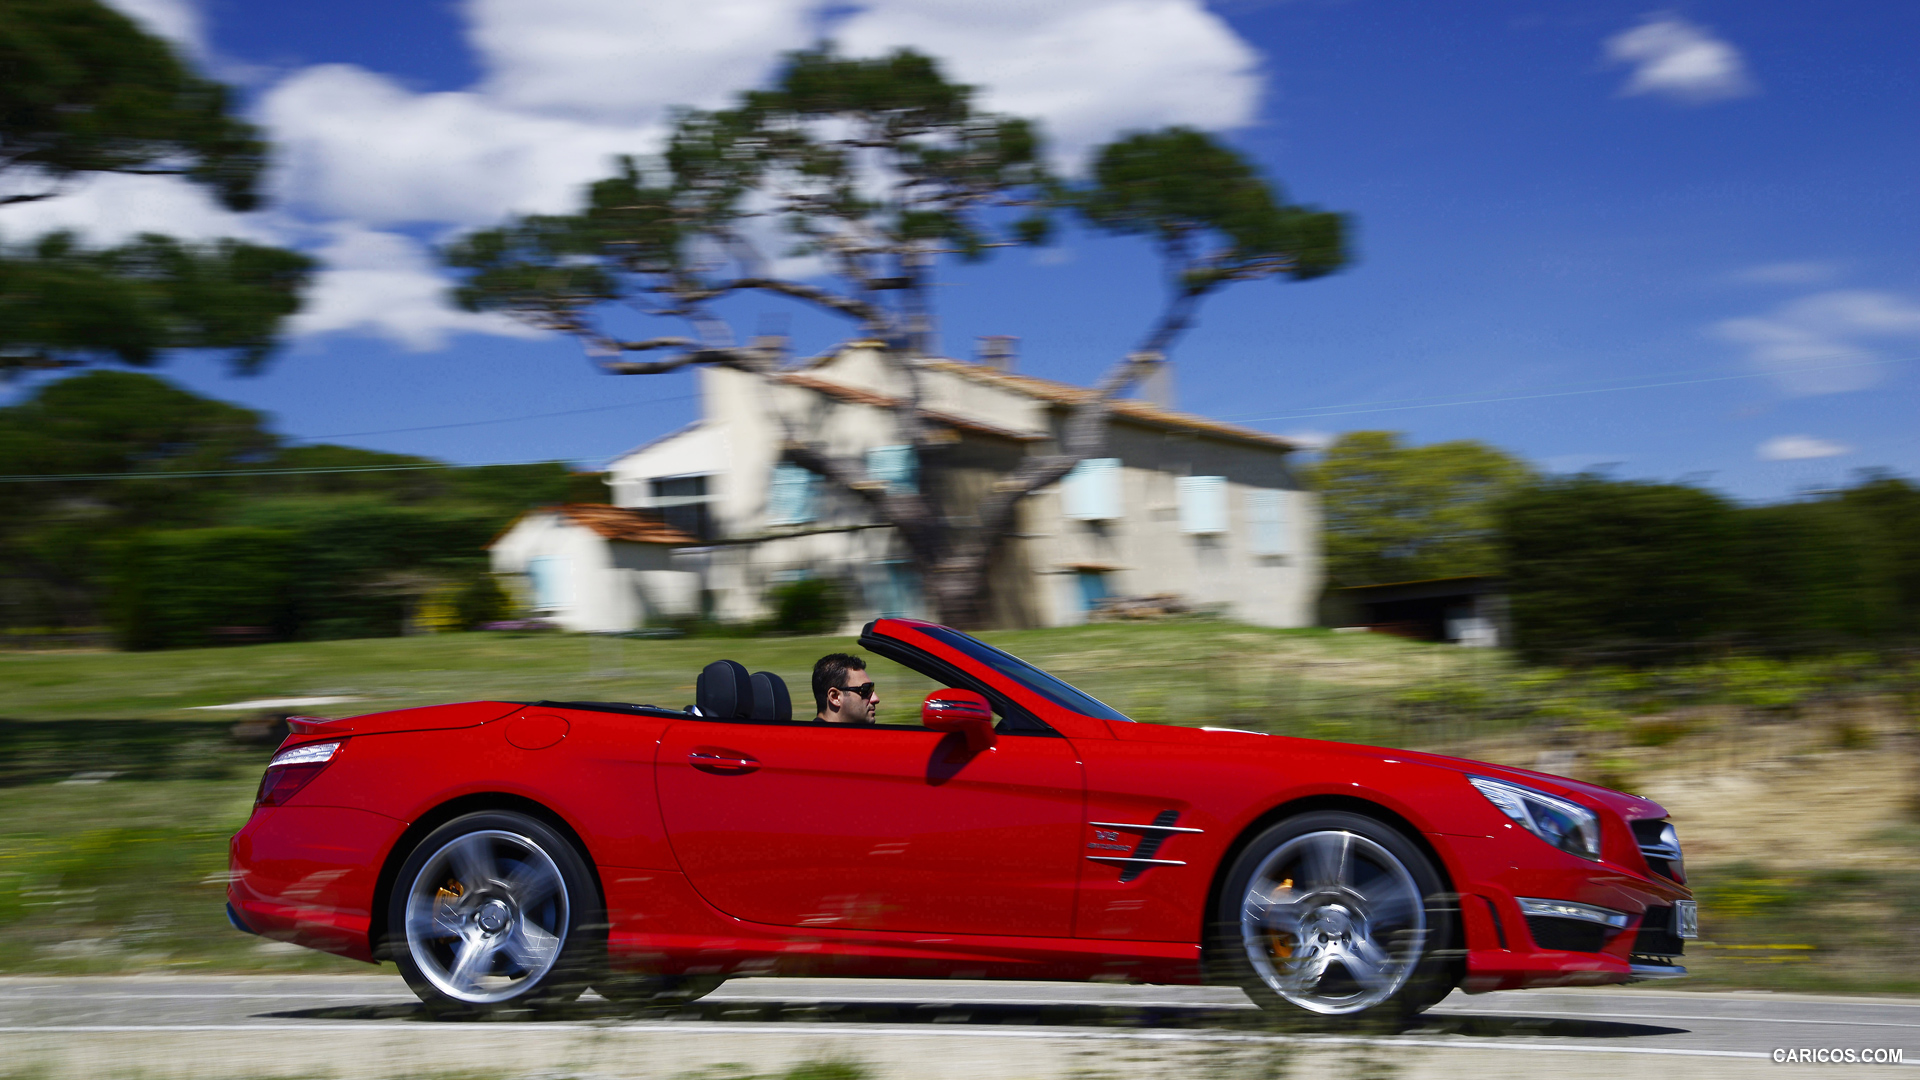 2013 Mercedes-Benz SL63 AMG Red - Side, #52 of 111